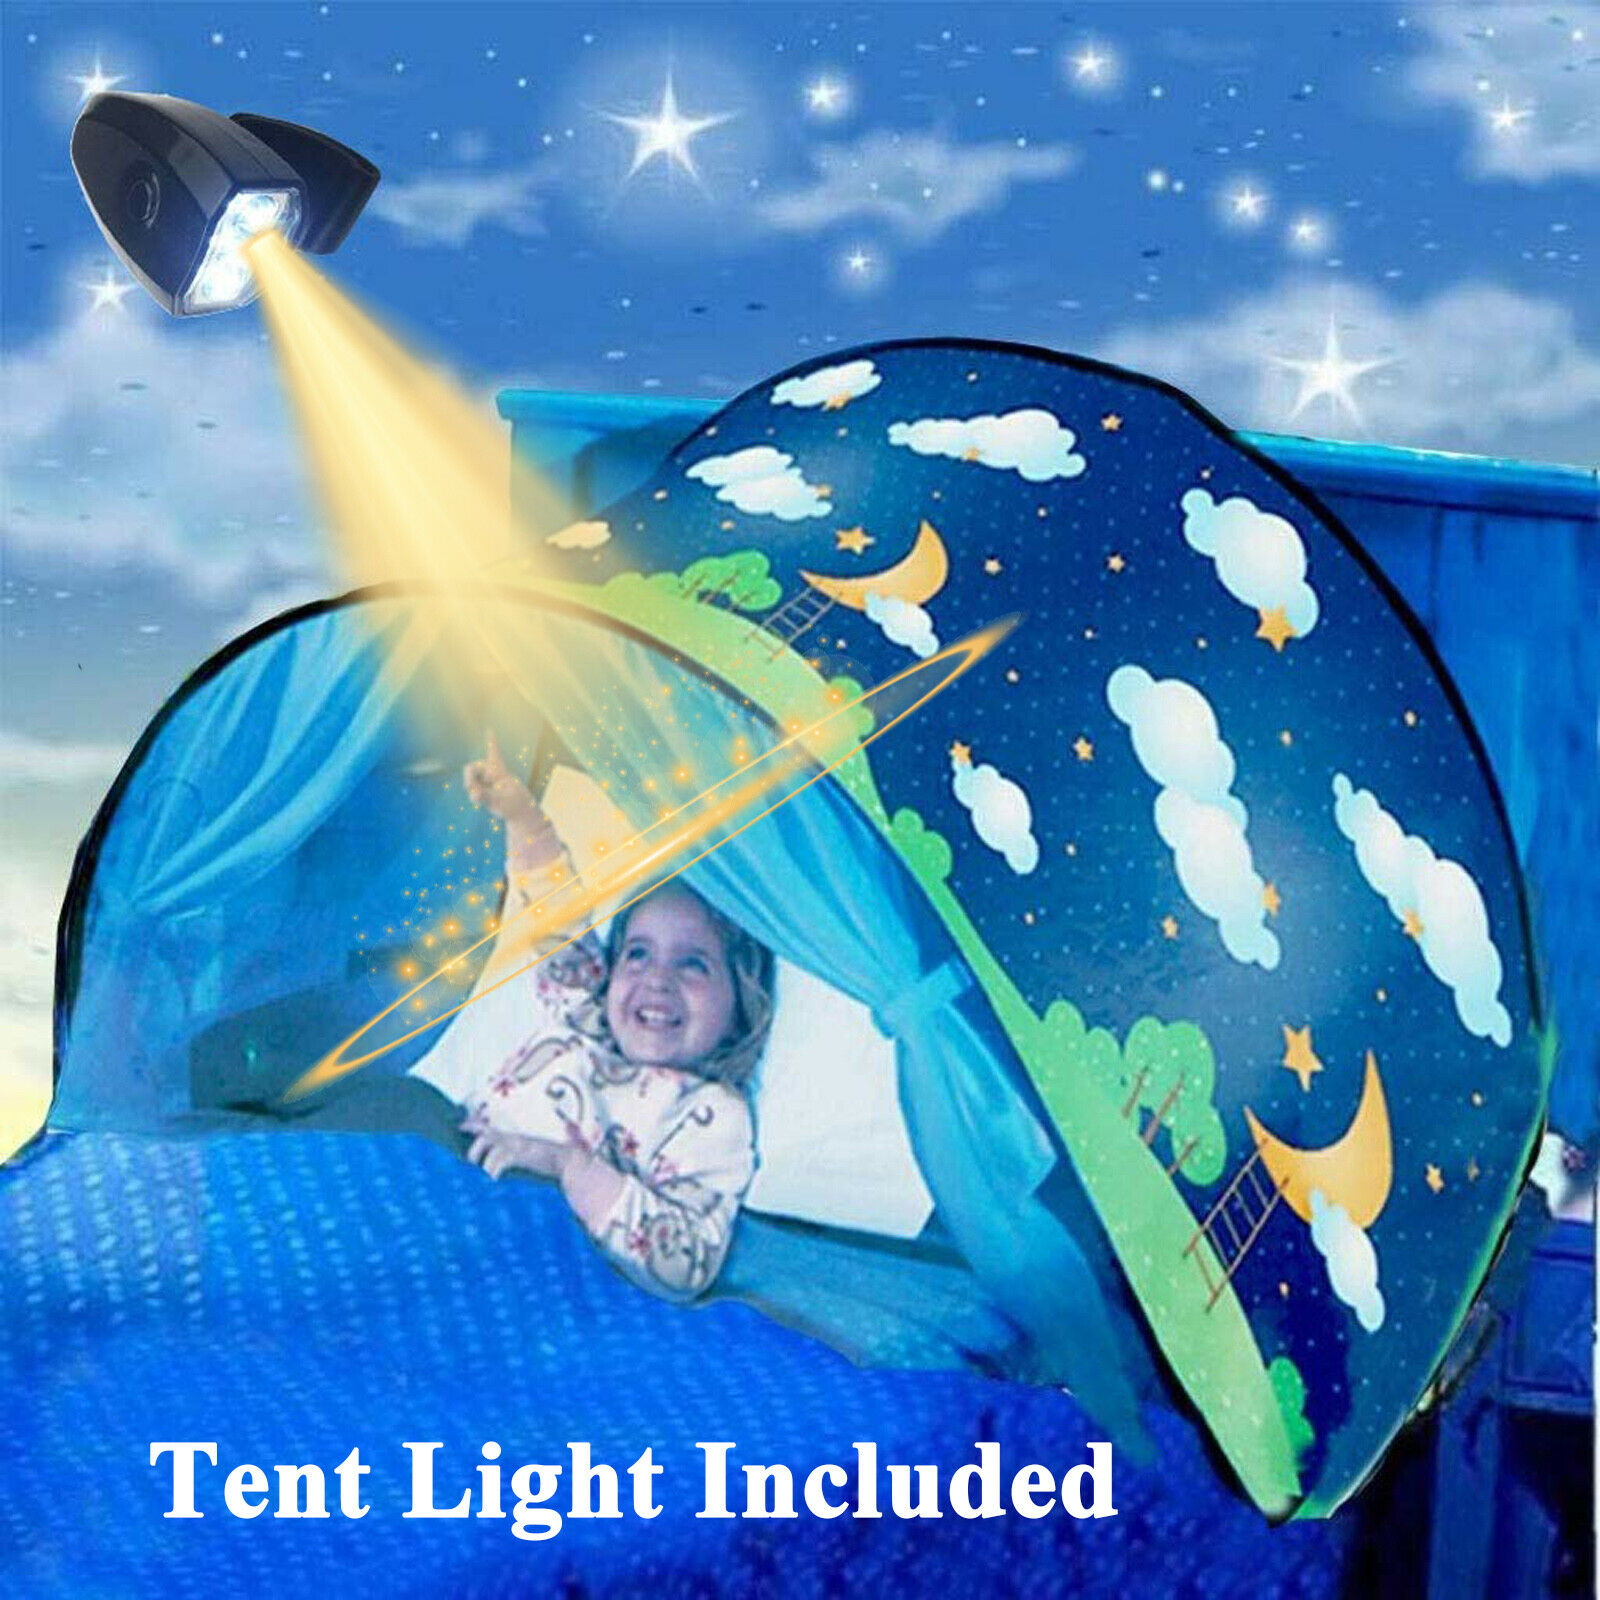 Dream Tent Kid Unicorn Space Adventure Playhouse Light Foldable Pop Up Bed Gifts 